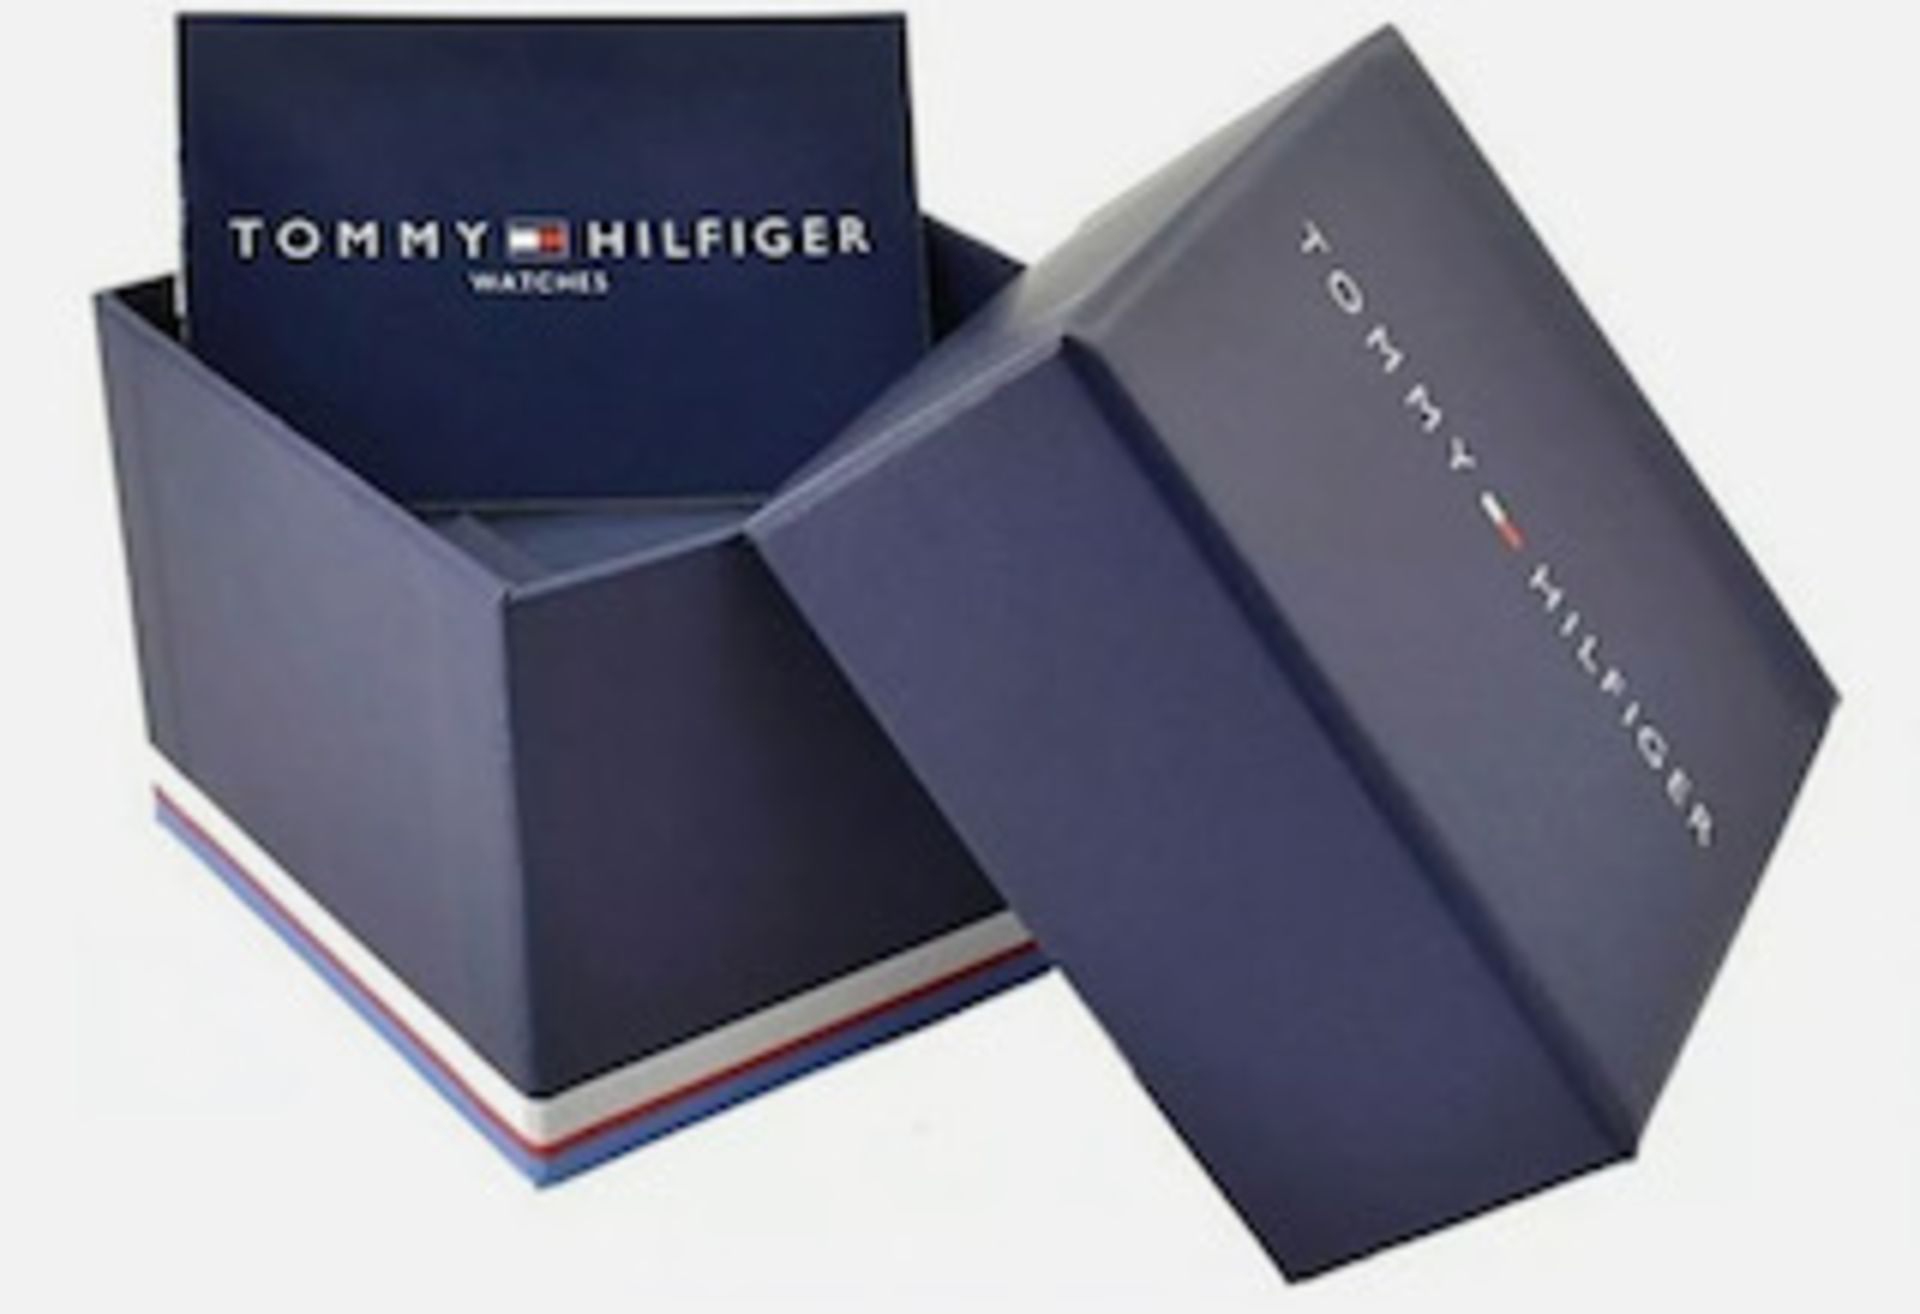 Tommy Hilfiger Men's Gavin Stainless Steel Silver Black Dial Watch - Image 6 of 6